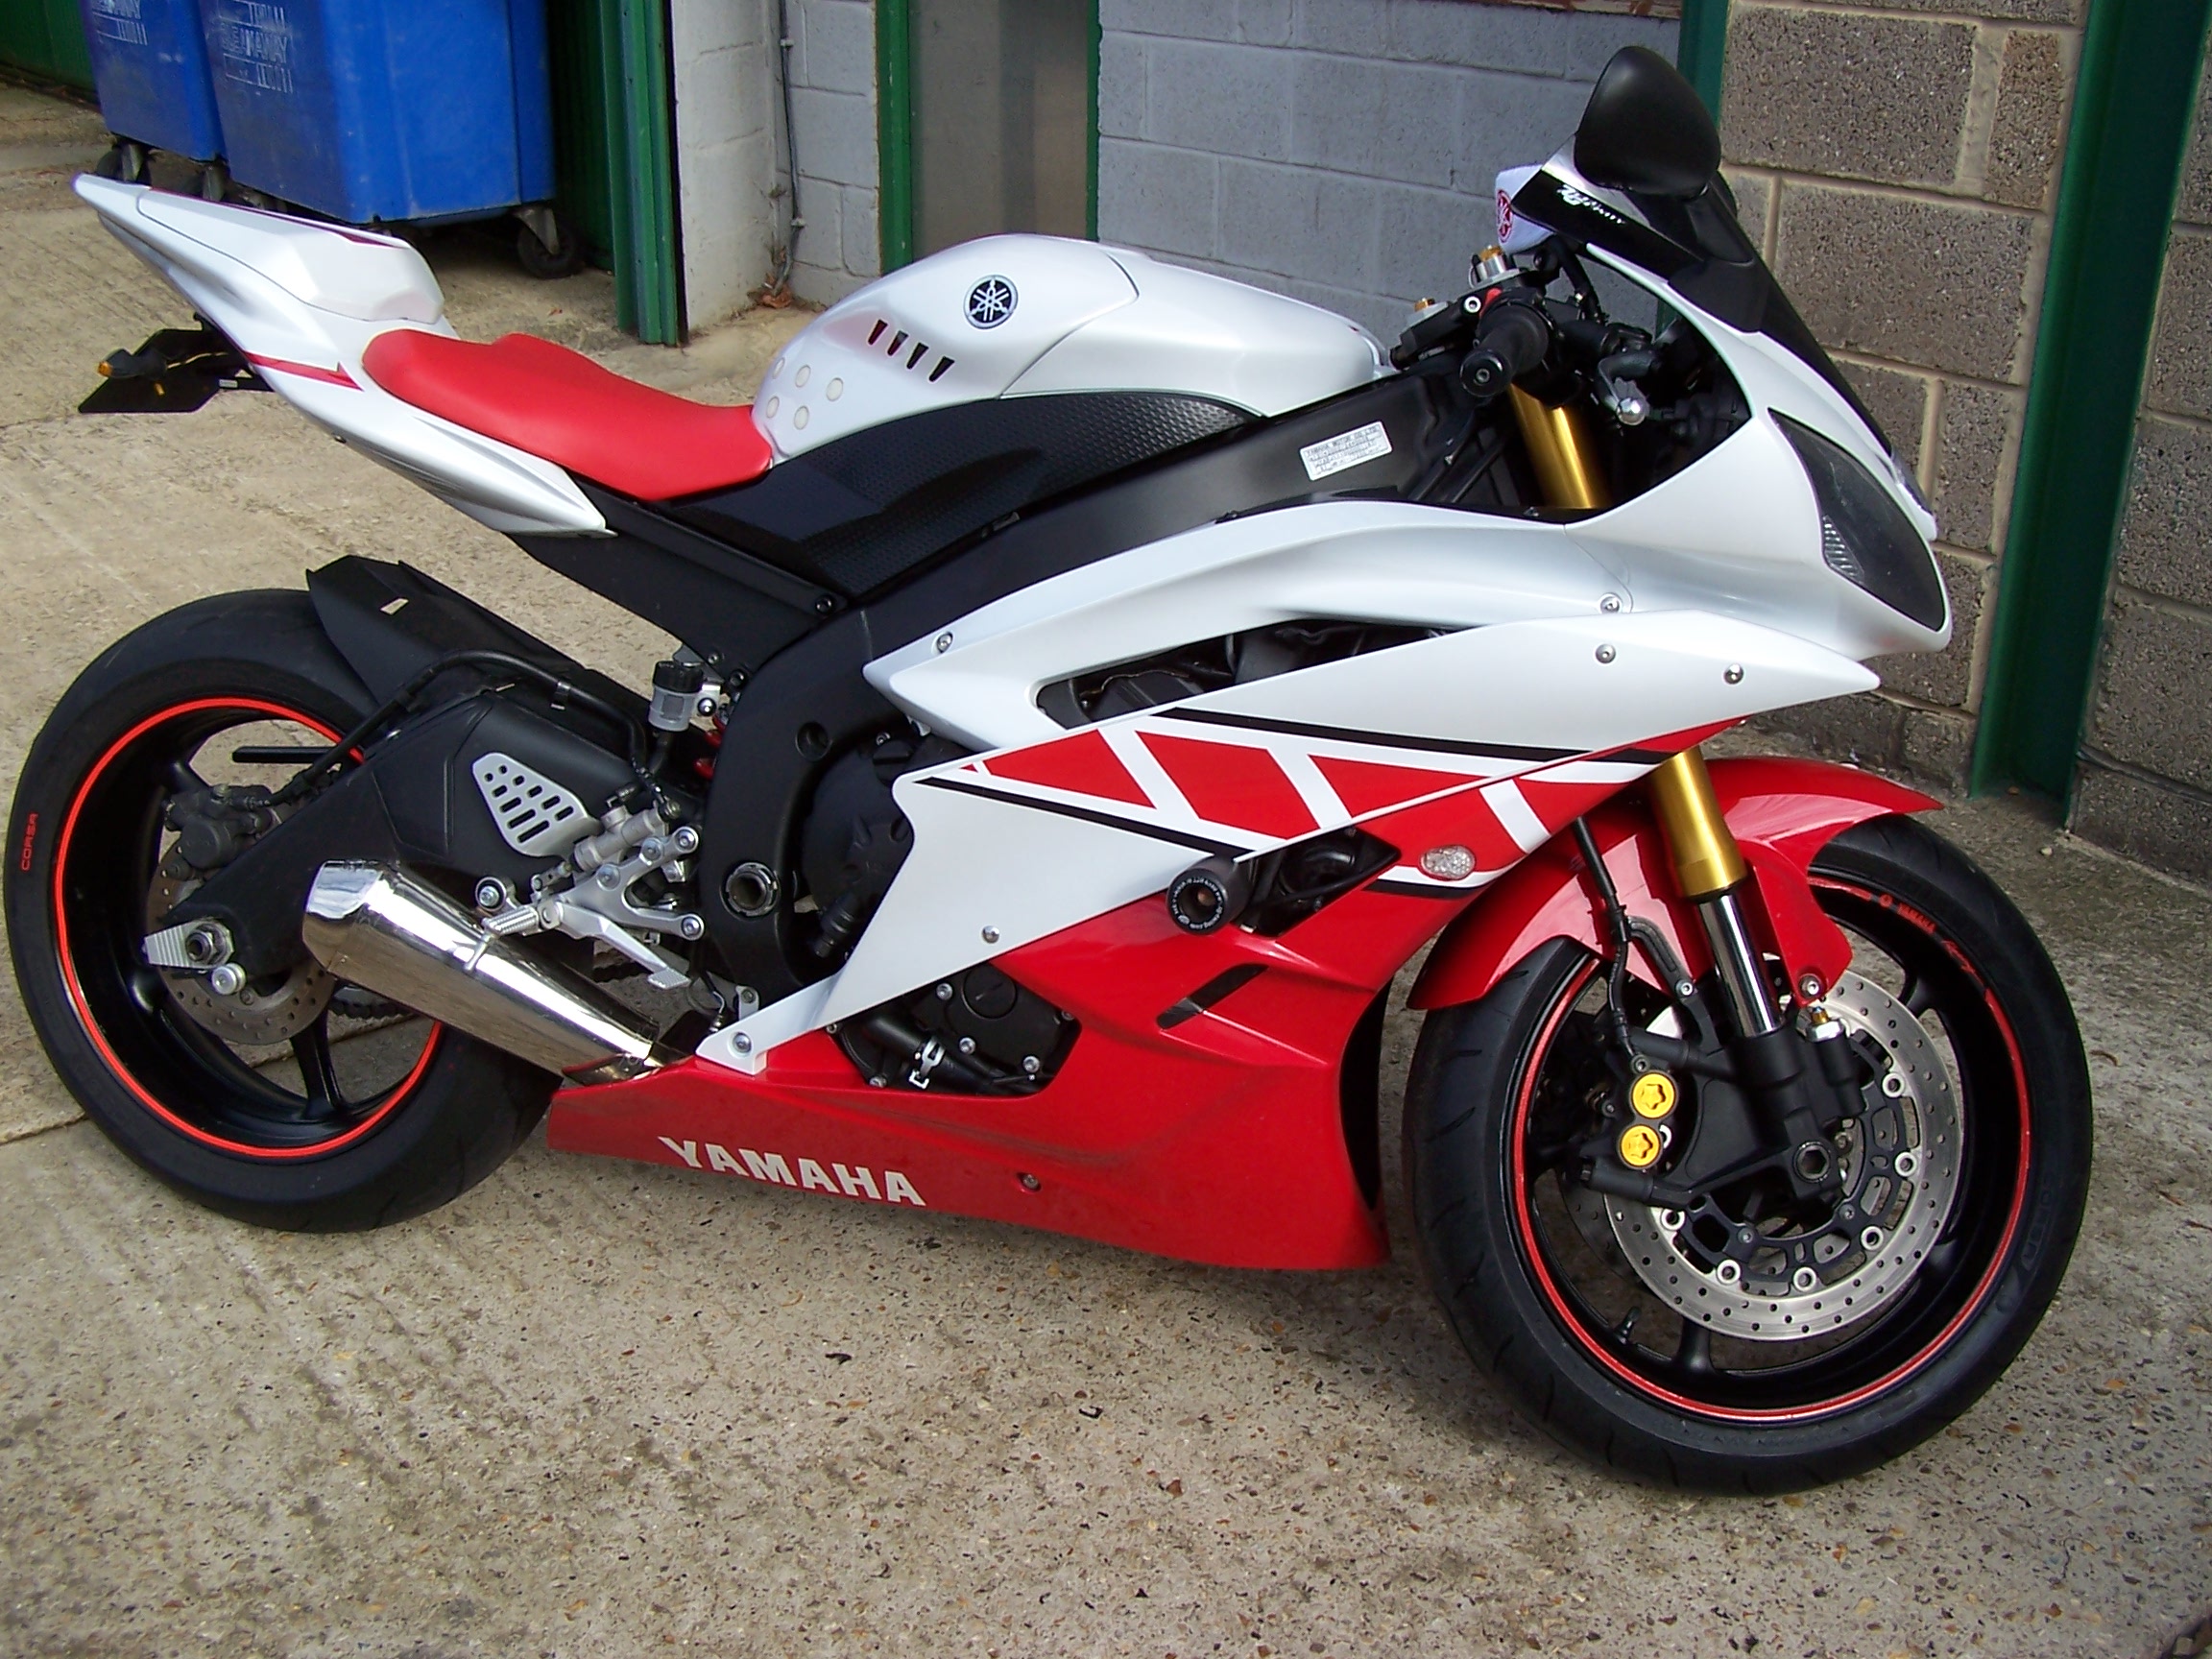 ECU RE-MAPPING UPDATE! Anyone with an ’06-‘011 Yamaha R6 need a remap? Get in touch!